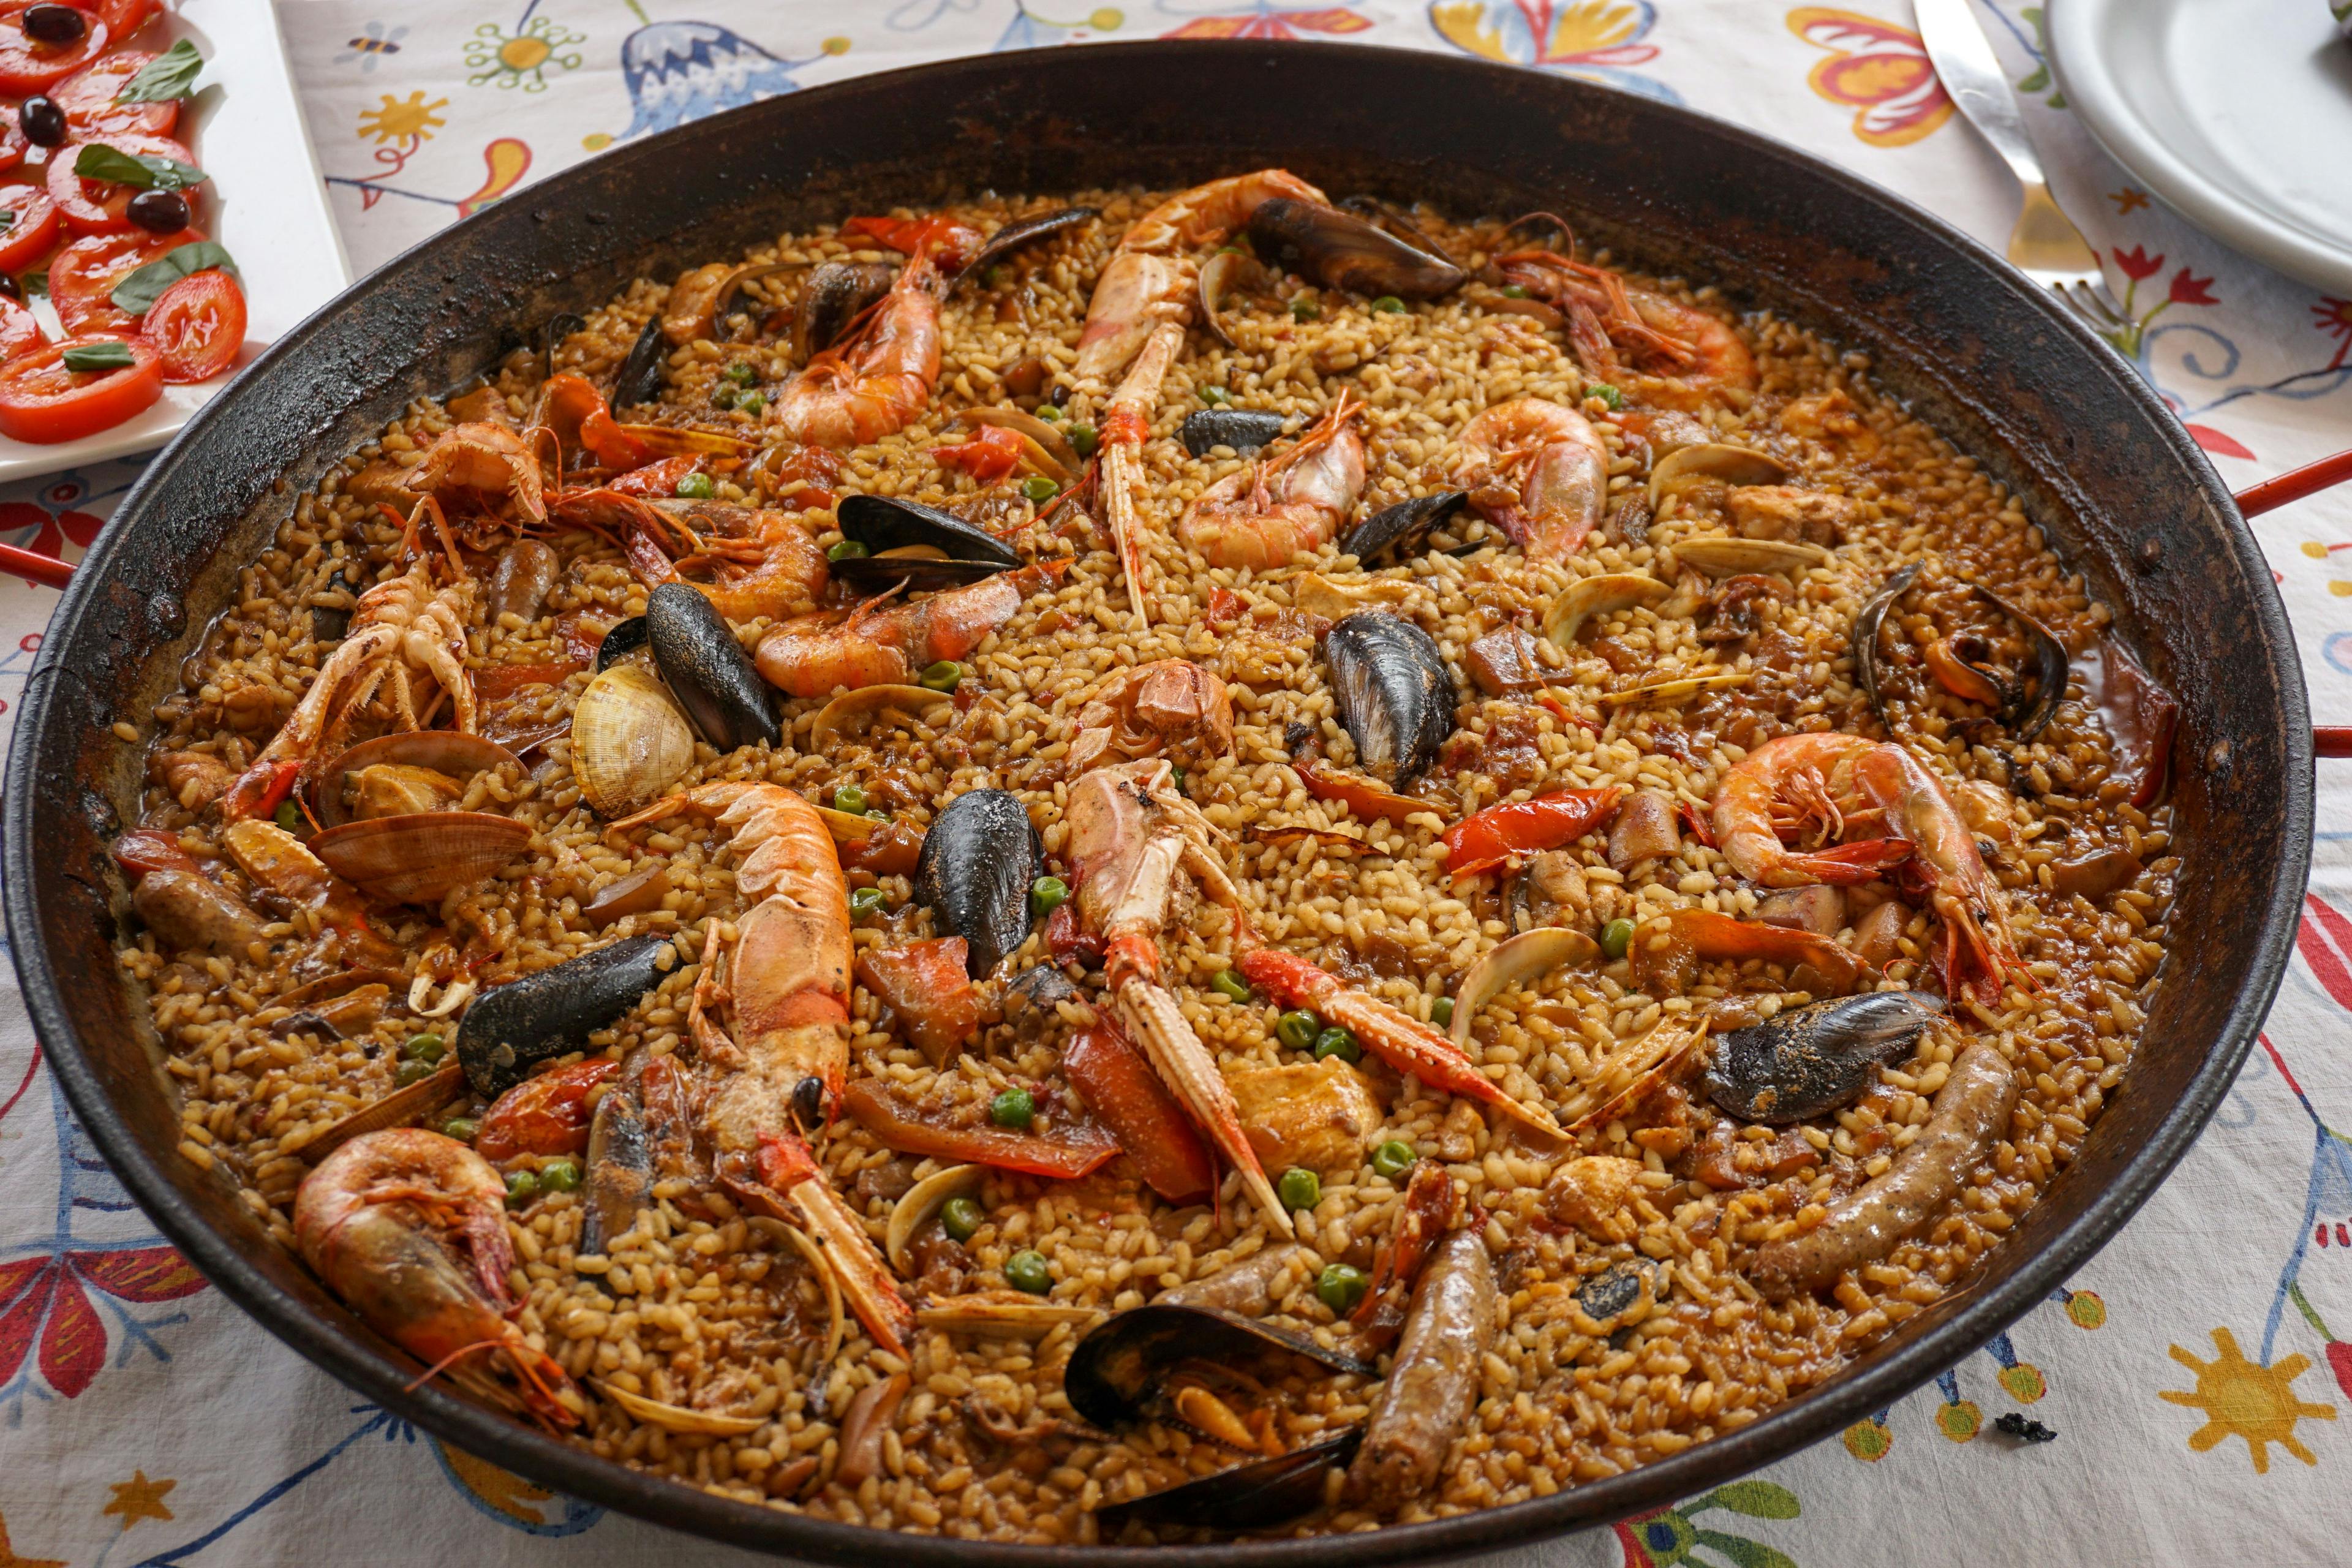 Seafood Paella in Spain.